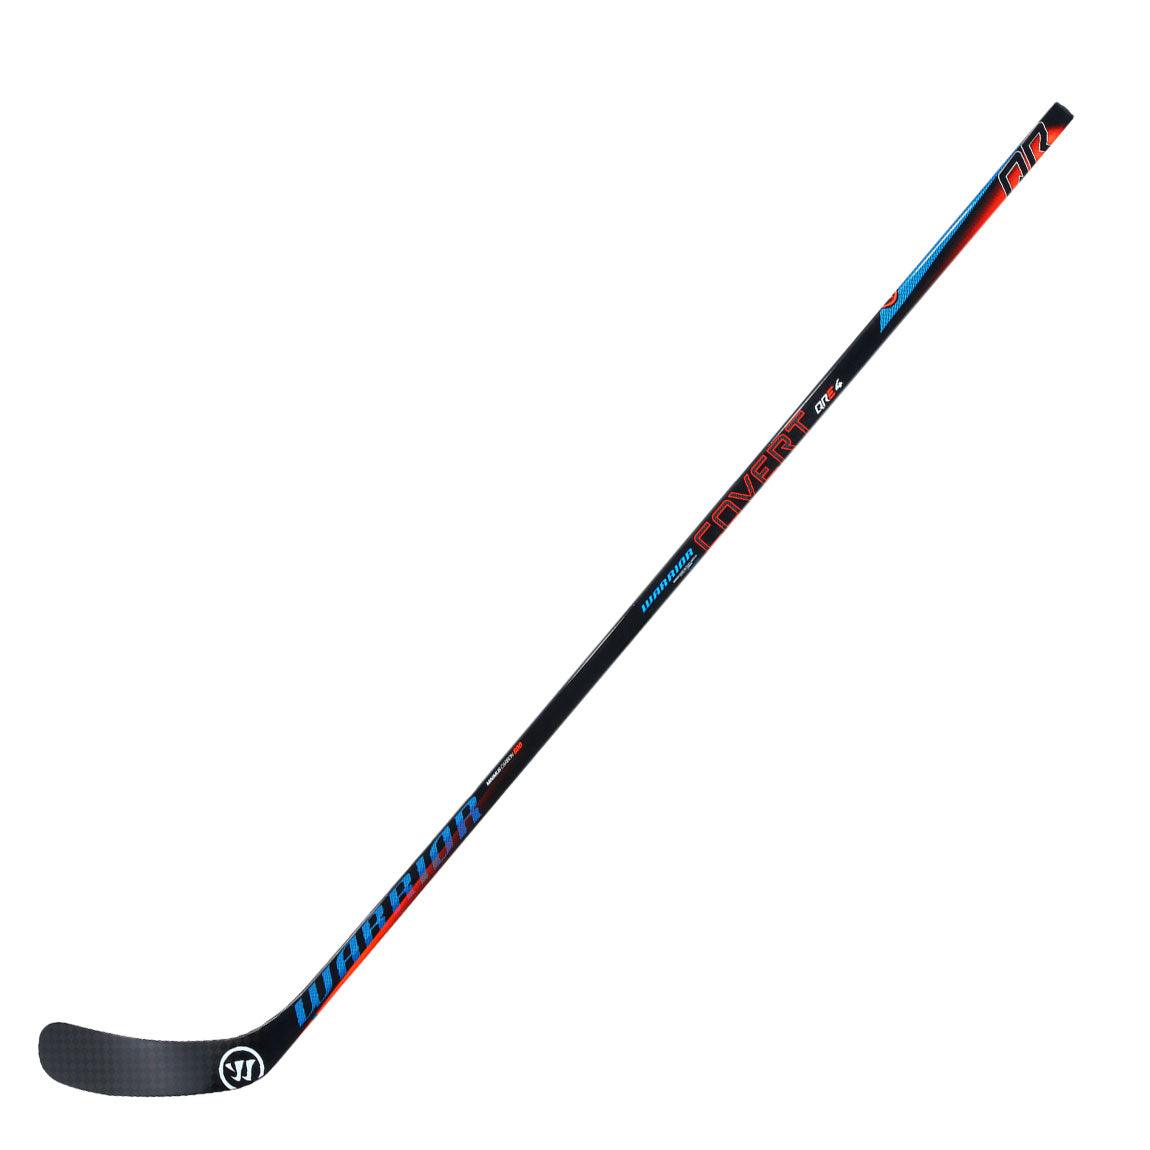 Covert QRE 4 Hockey Stick - Senior - Sports Excellence